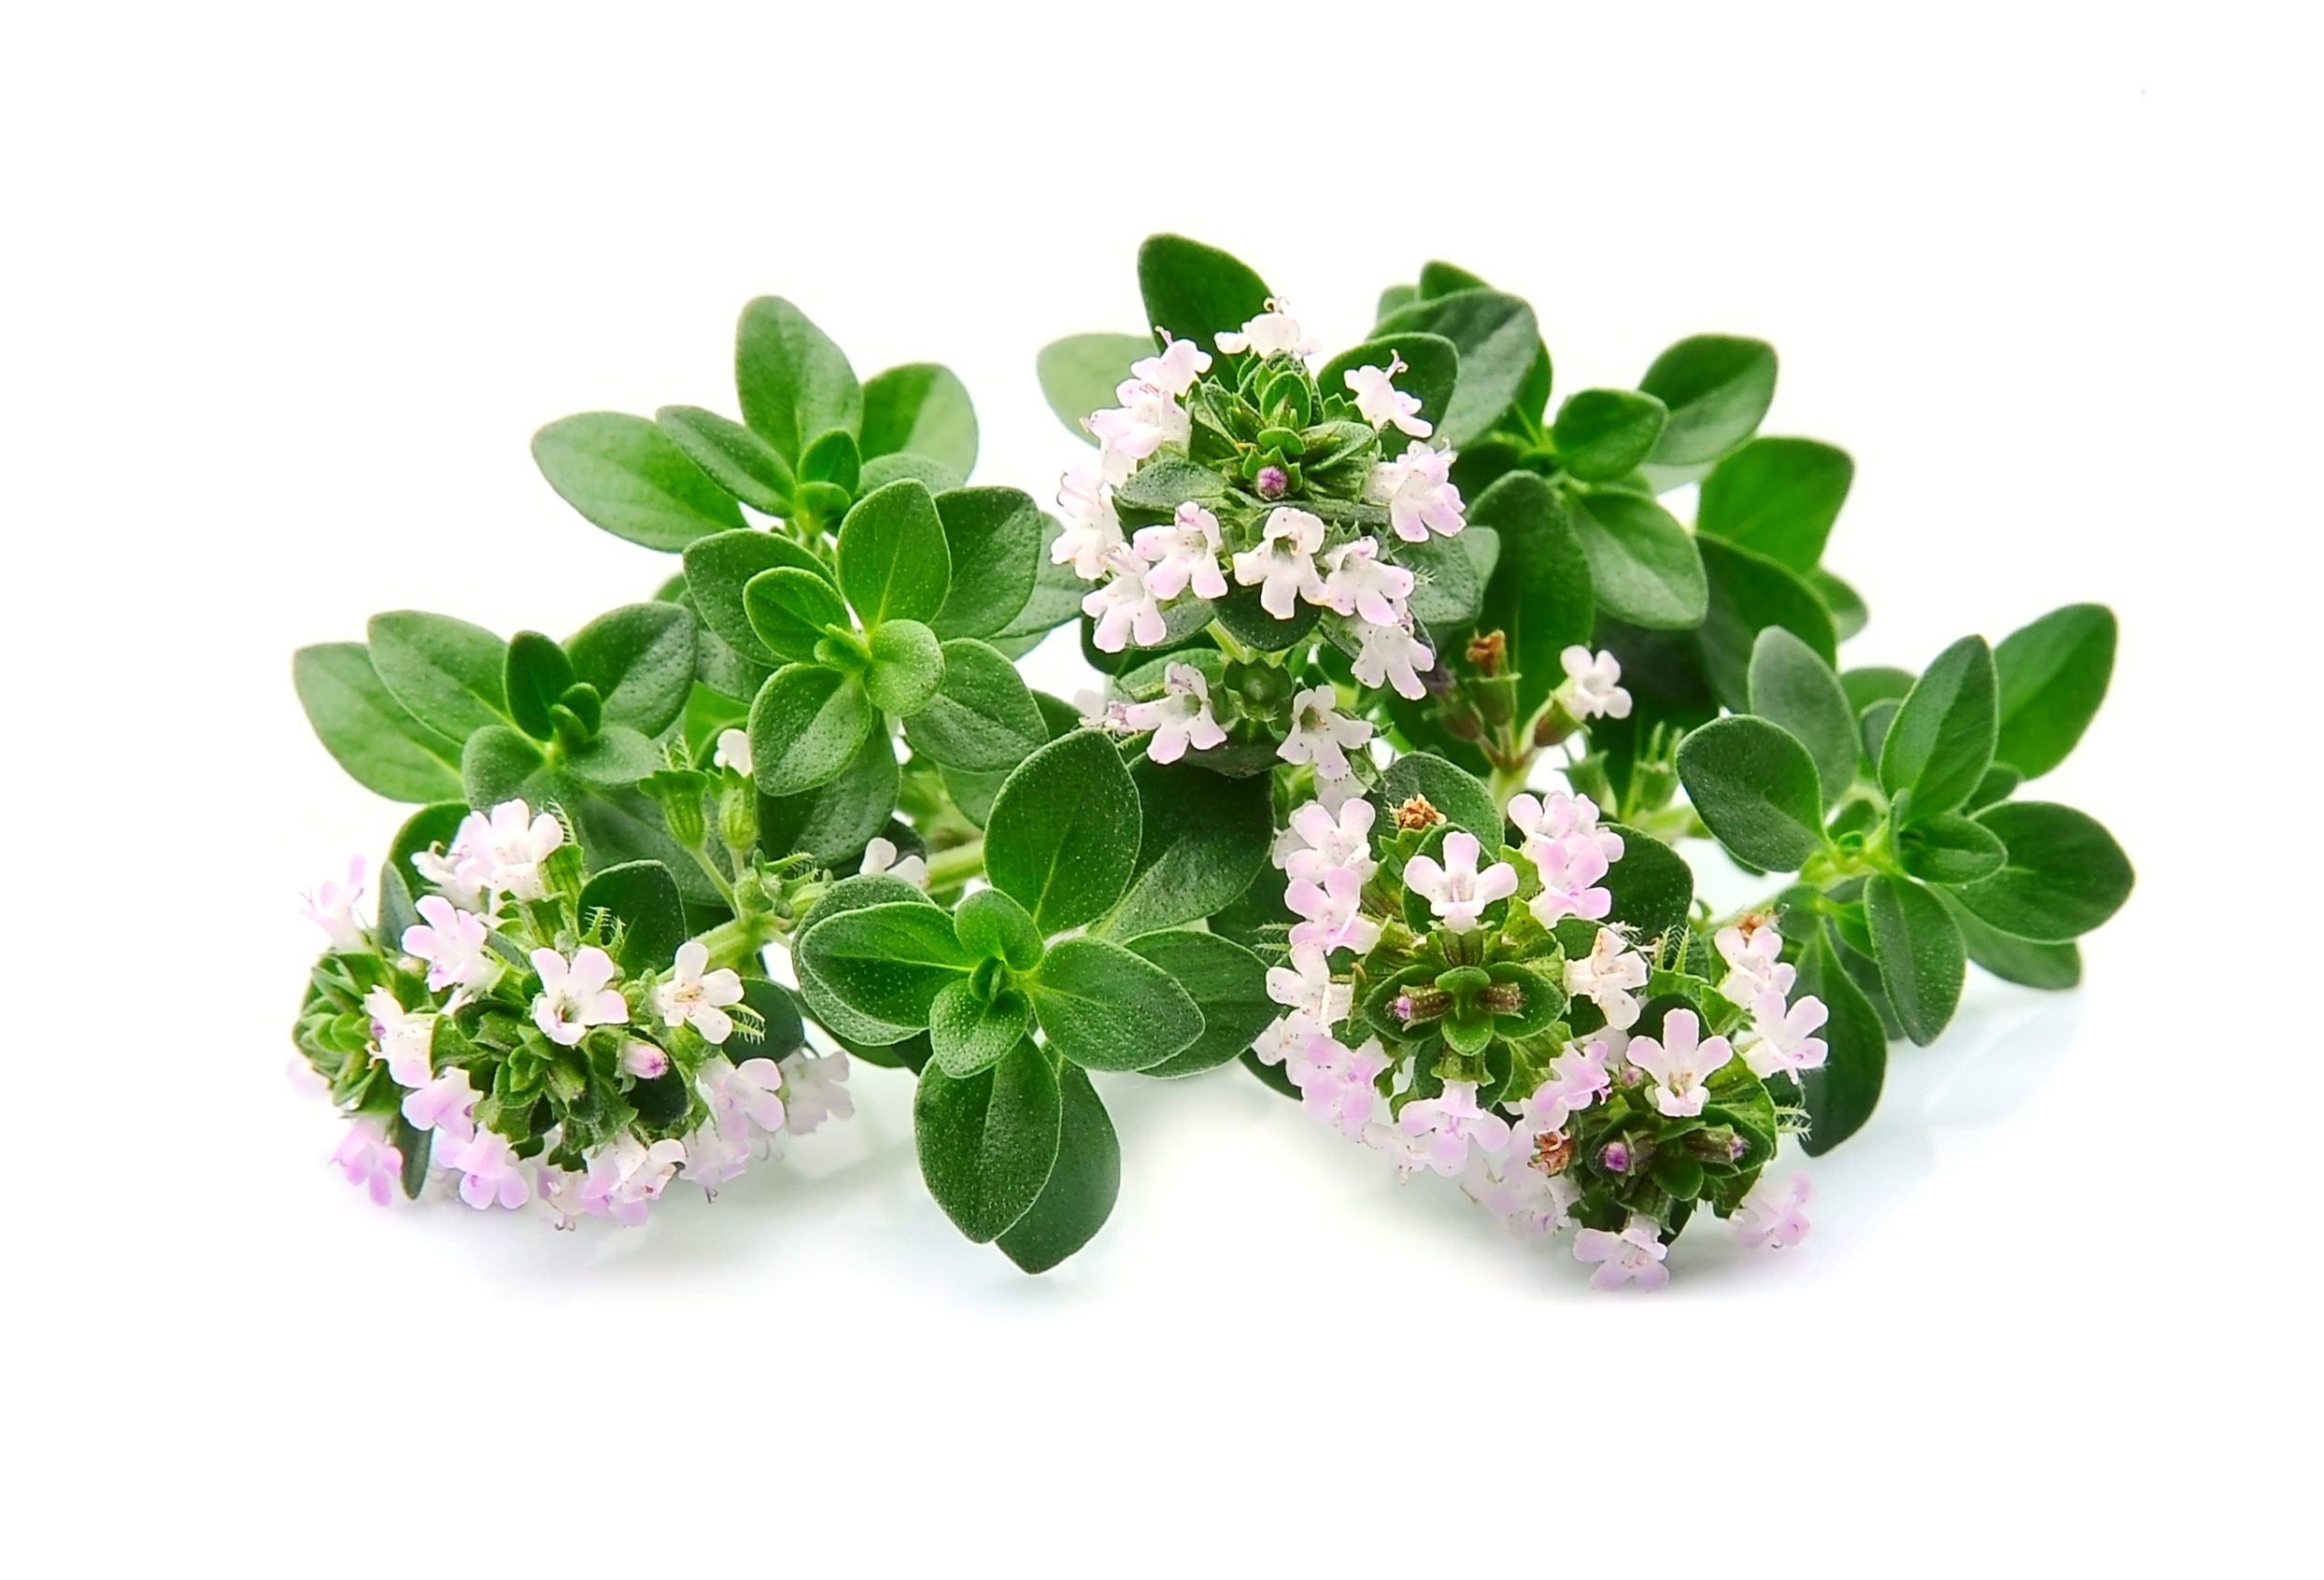 Herbs of thyme on white backgrounds.